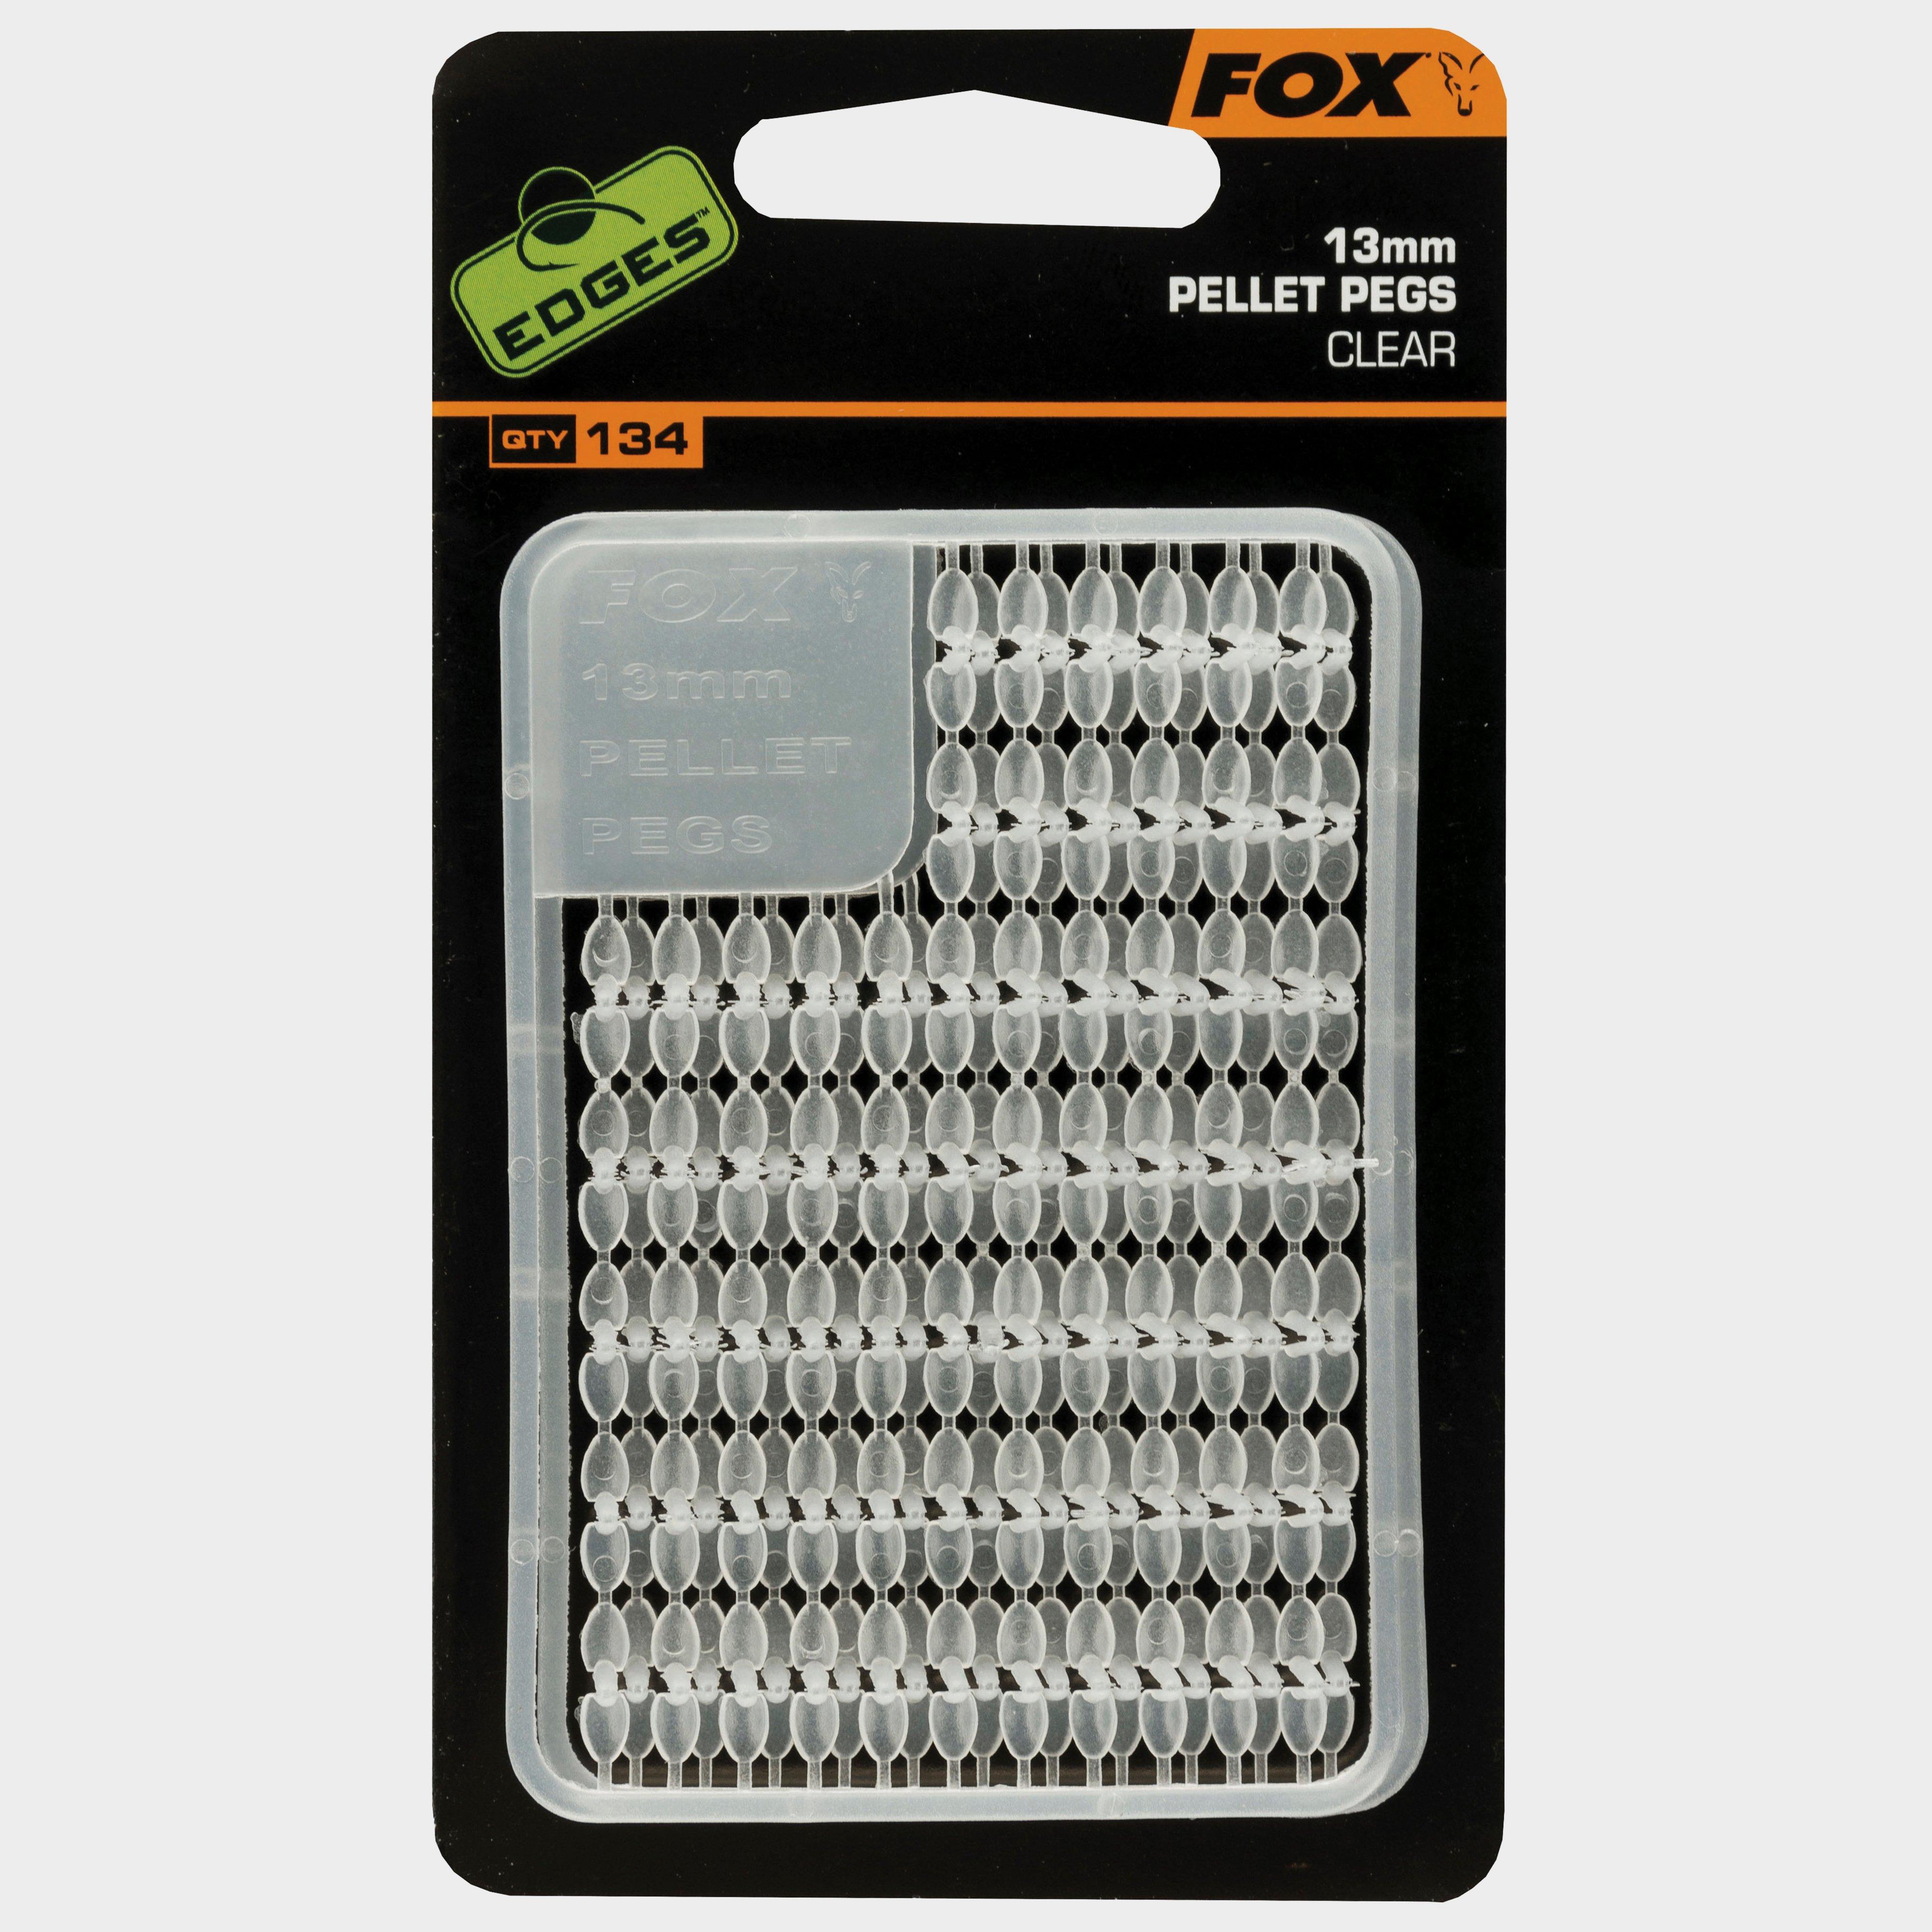 Photos - Other for Fishing Fox INTERNATIONAL Edges Pellet Pegs 13Mm Clear, Silver 